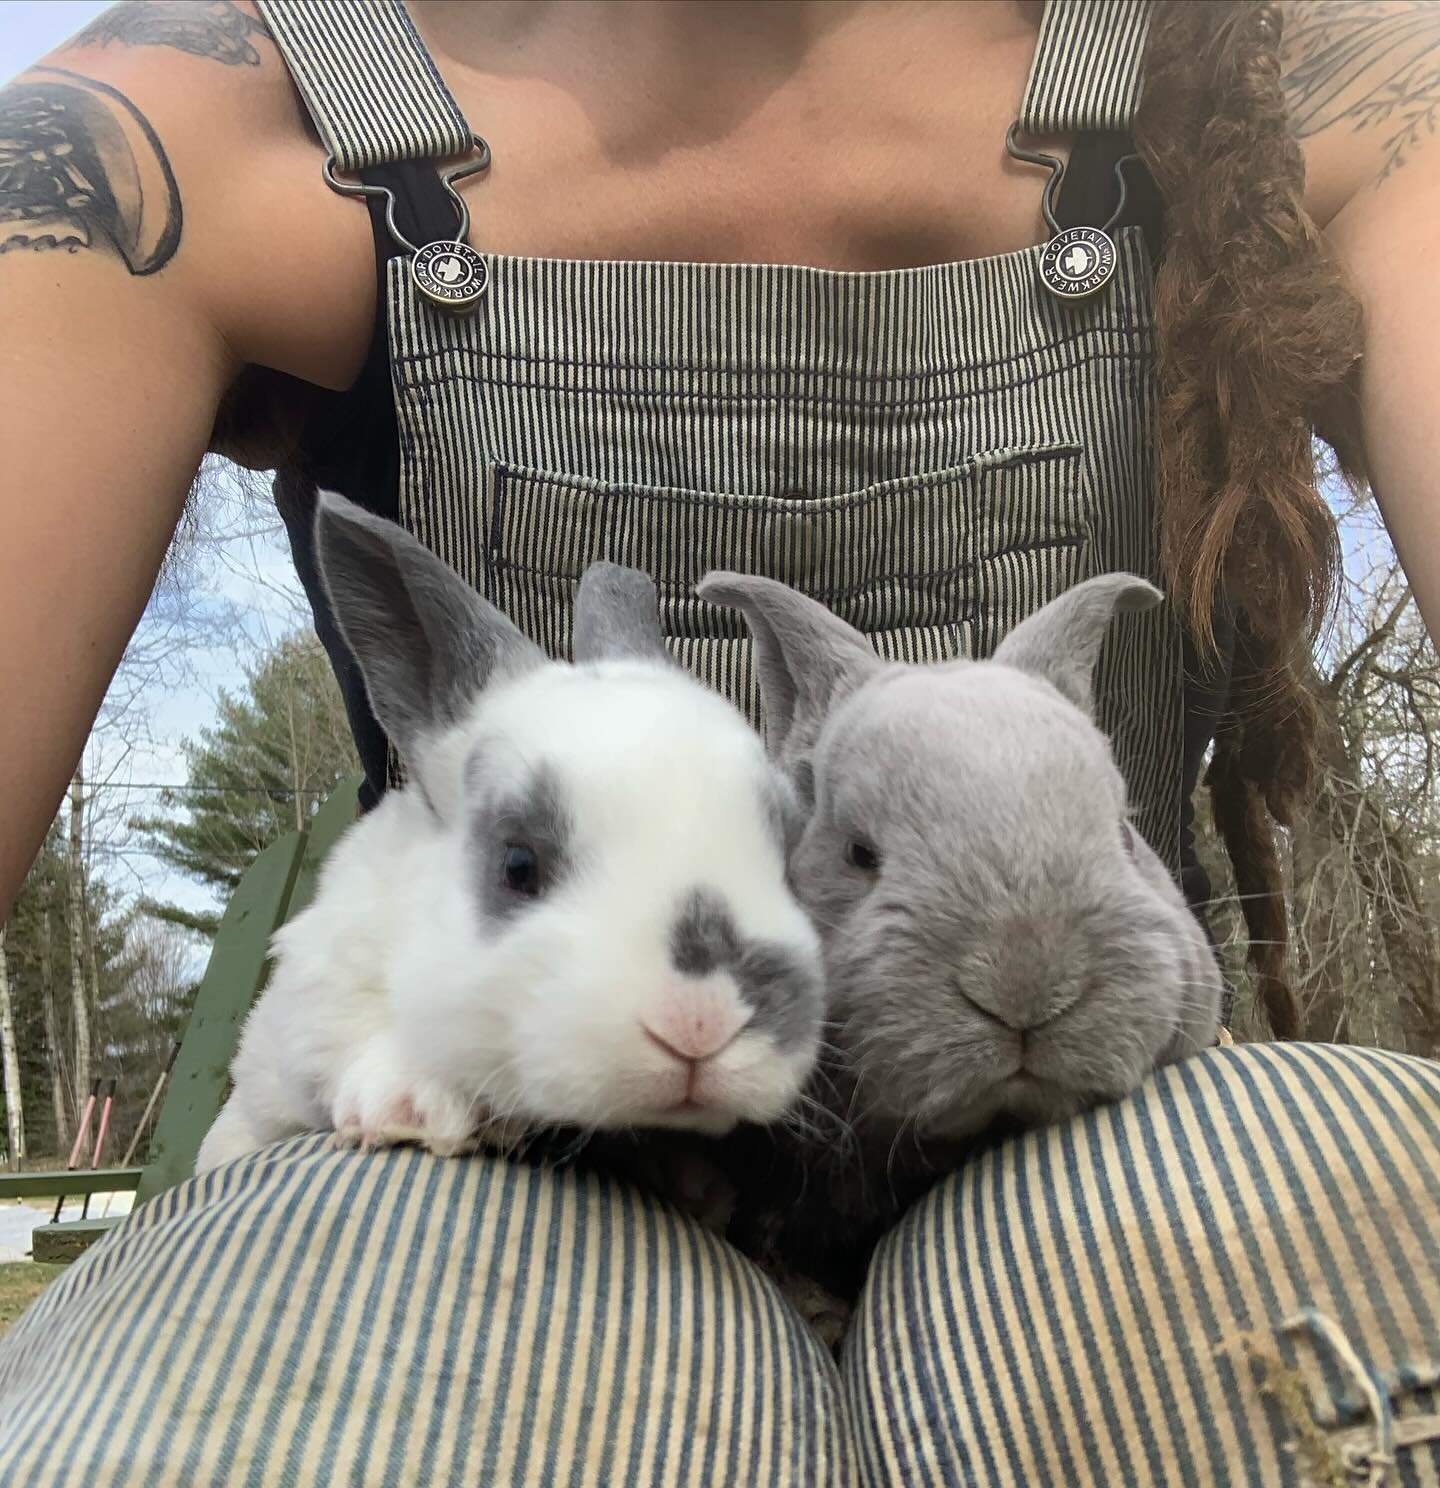 At almost four weeks old, these snuggle muffins are my favorite age. We have some full Rex (first photo) and some New Zealand / Rex crosses (second and third photos) in our &ldquo;fluffle&rdquo;. Yeah, a group of rabbits is so appropriately called a 